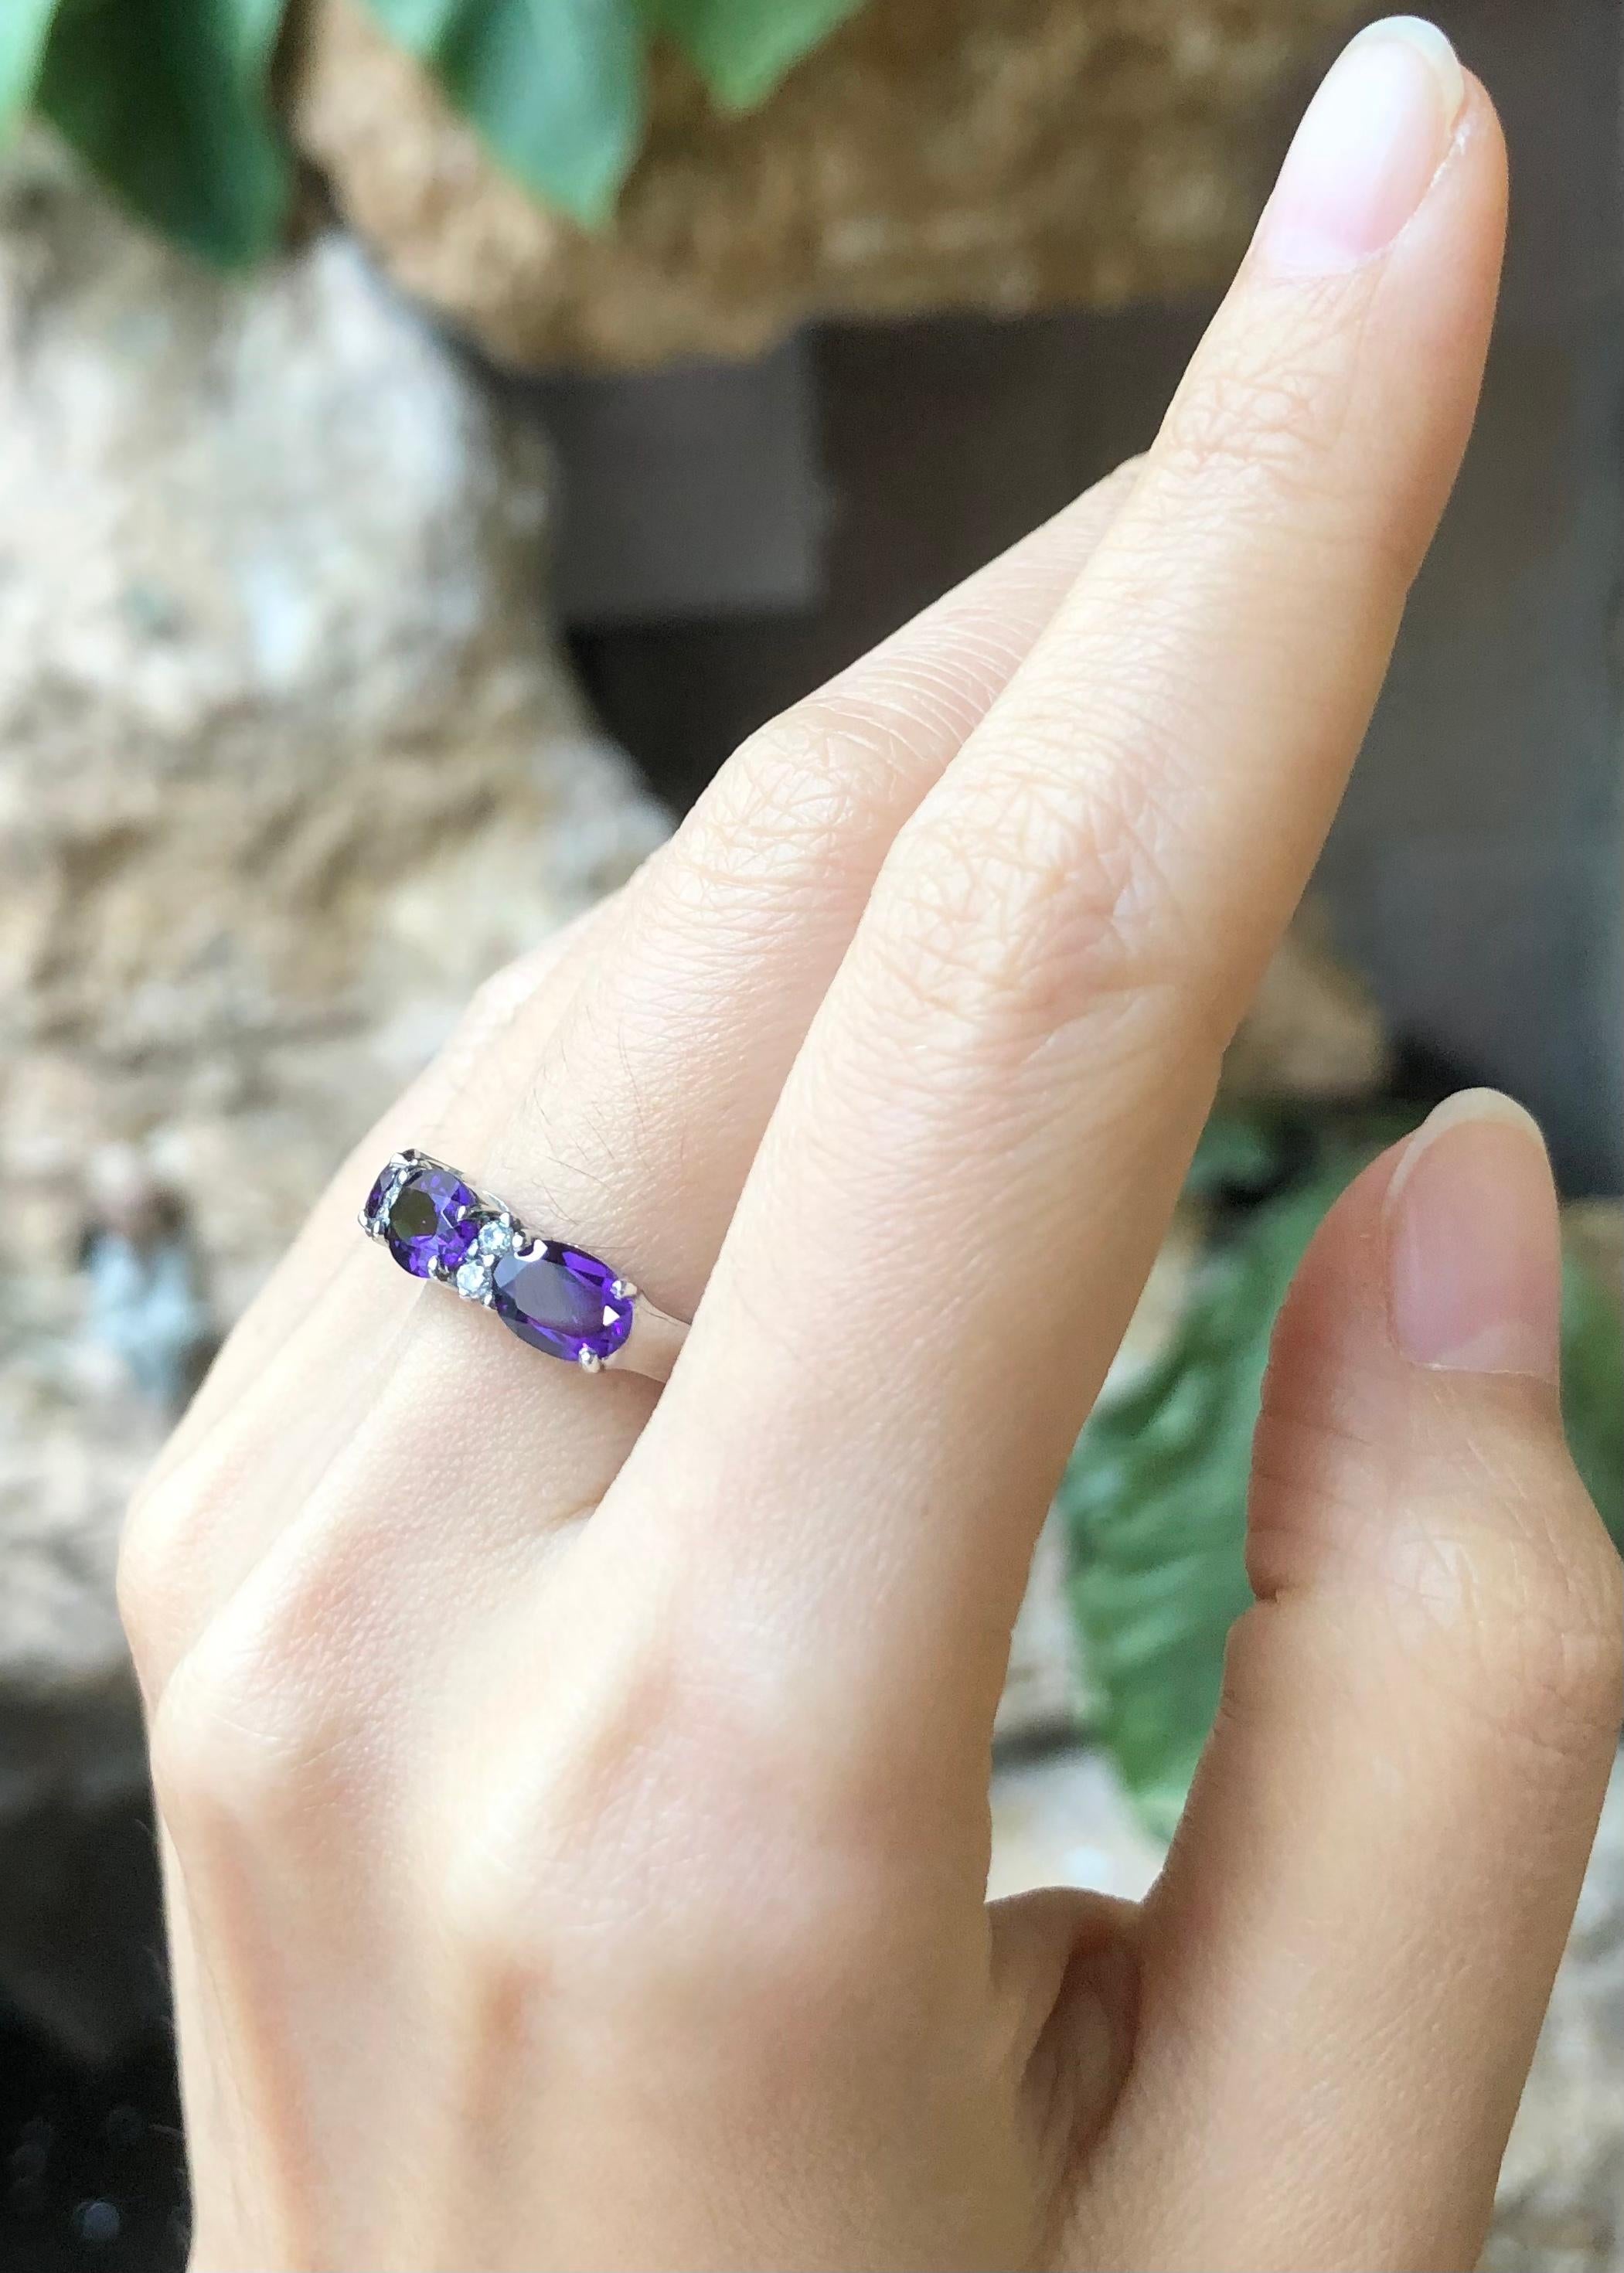 Amethyst with Cubic Zirconia Ring set in Silver Settings

Width:  2.1 cm 
Length: 0.5 cm
Ring Size: 53
Total Weight: 3.07 grams

*Please note that the silver setting is plated with rhodium to promote shine and help prevent oxidation.  However, with